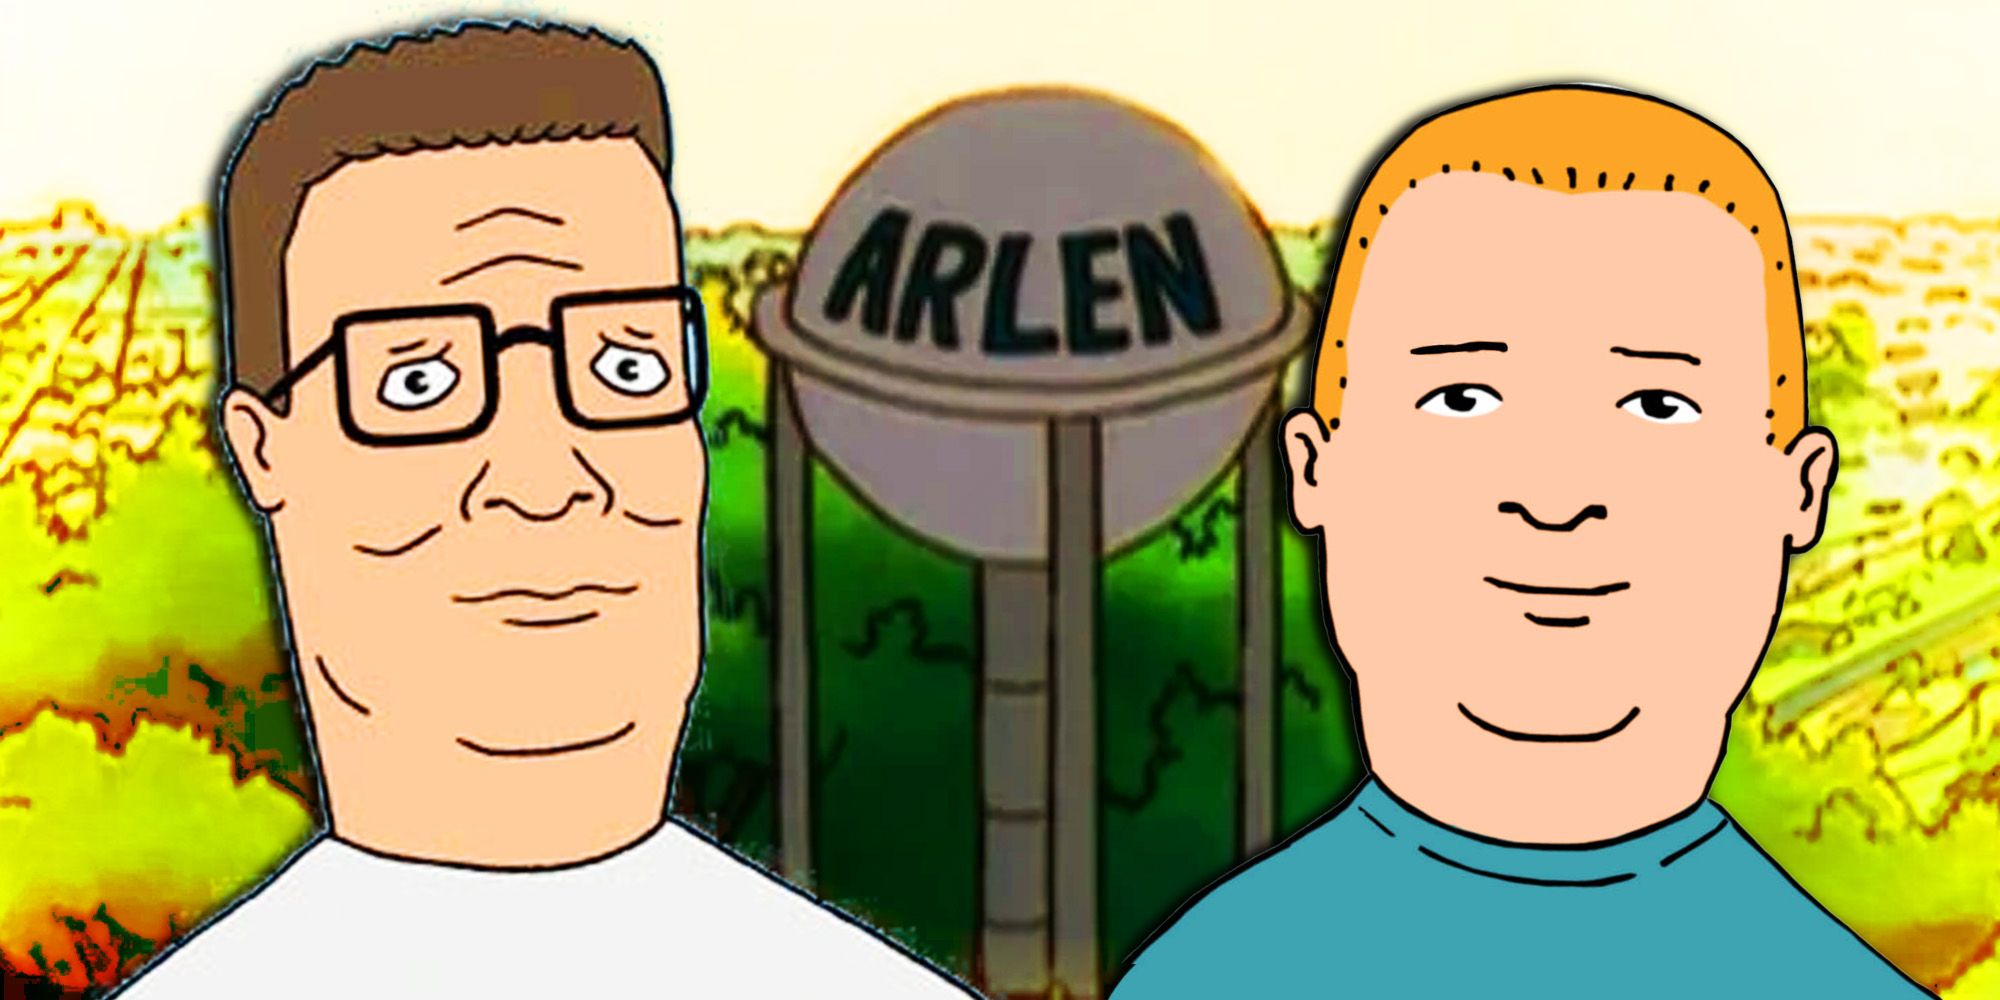 Hank and Bobby Hill and the Arlen Texas tower in King of the Hill